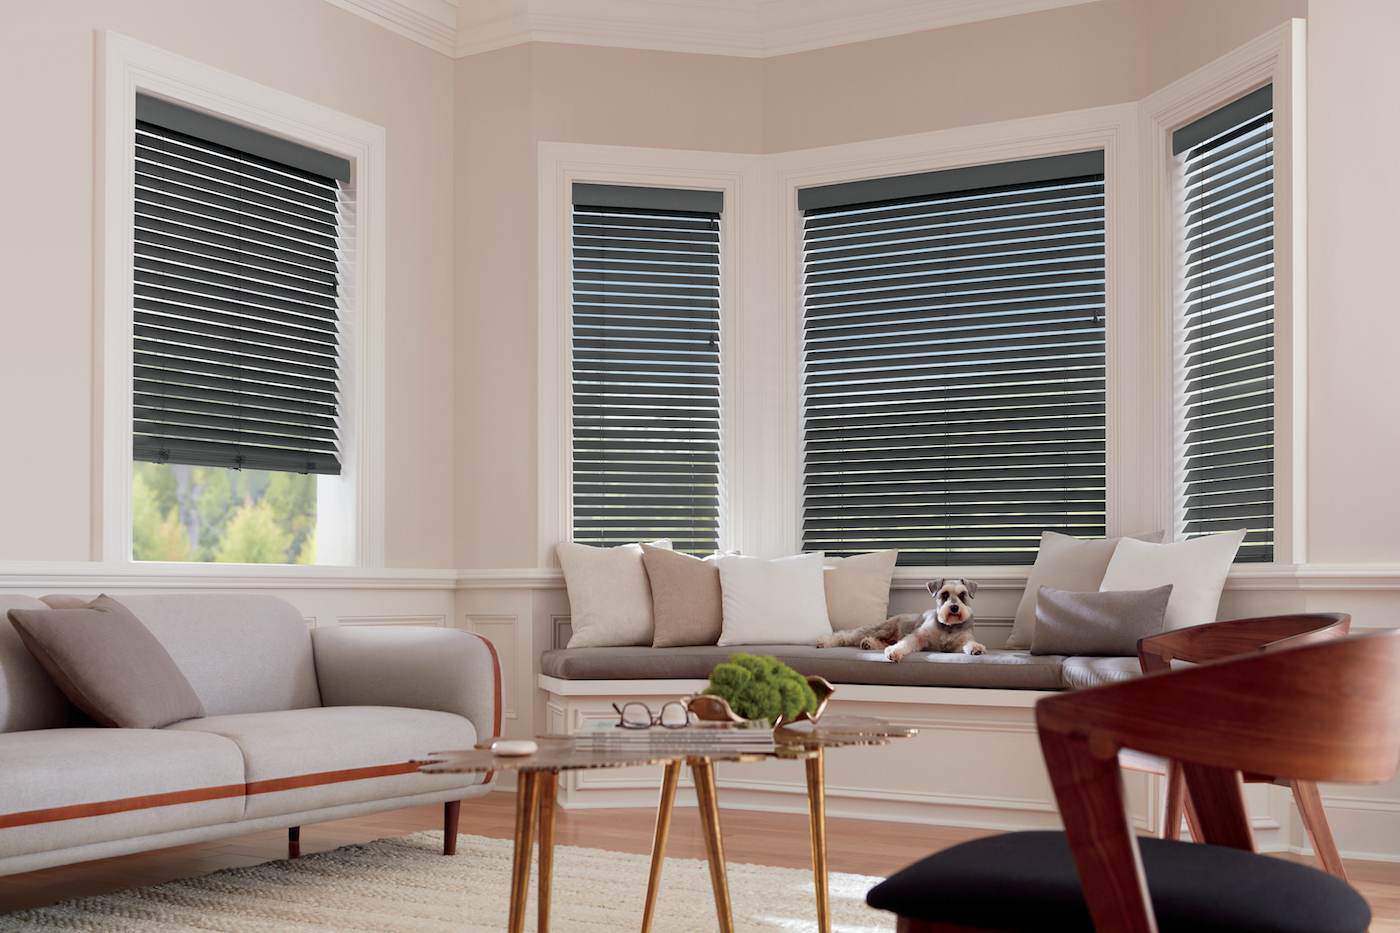 Parkland wood blinds with a dog installed inside a Massachusetts living room